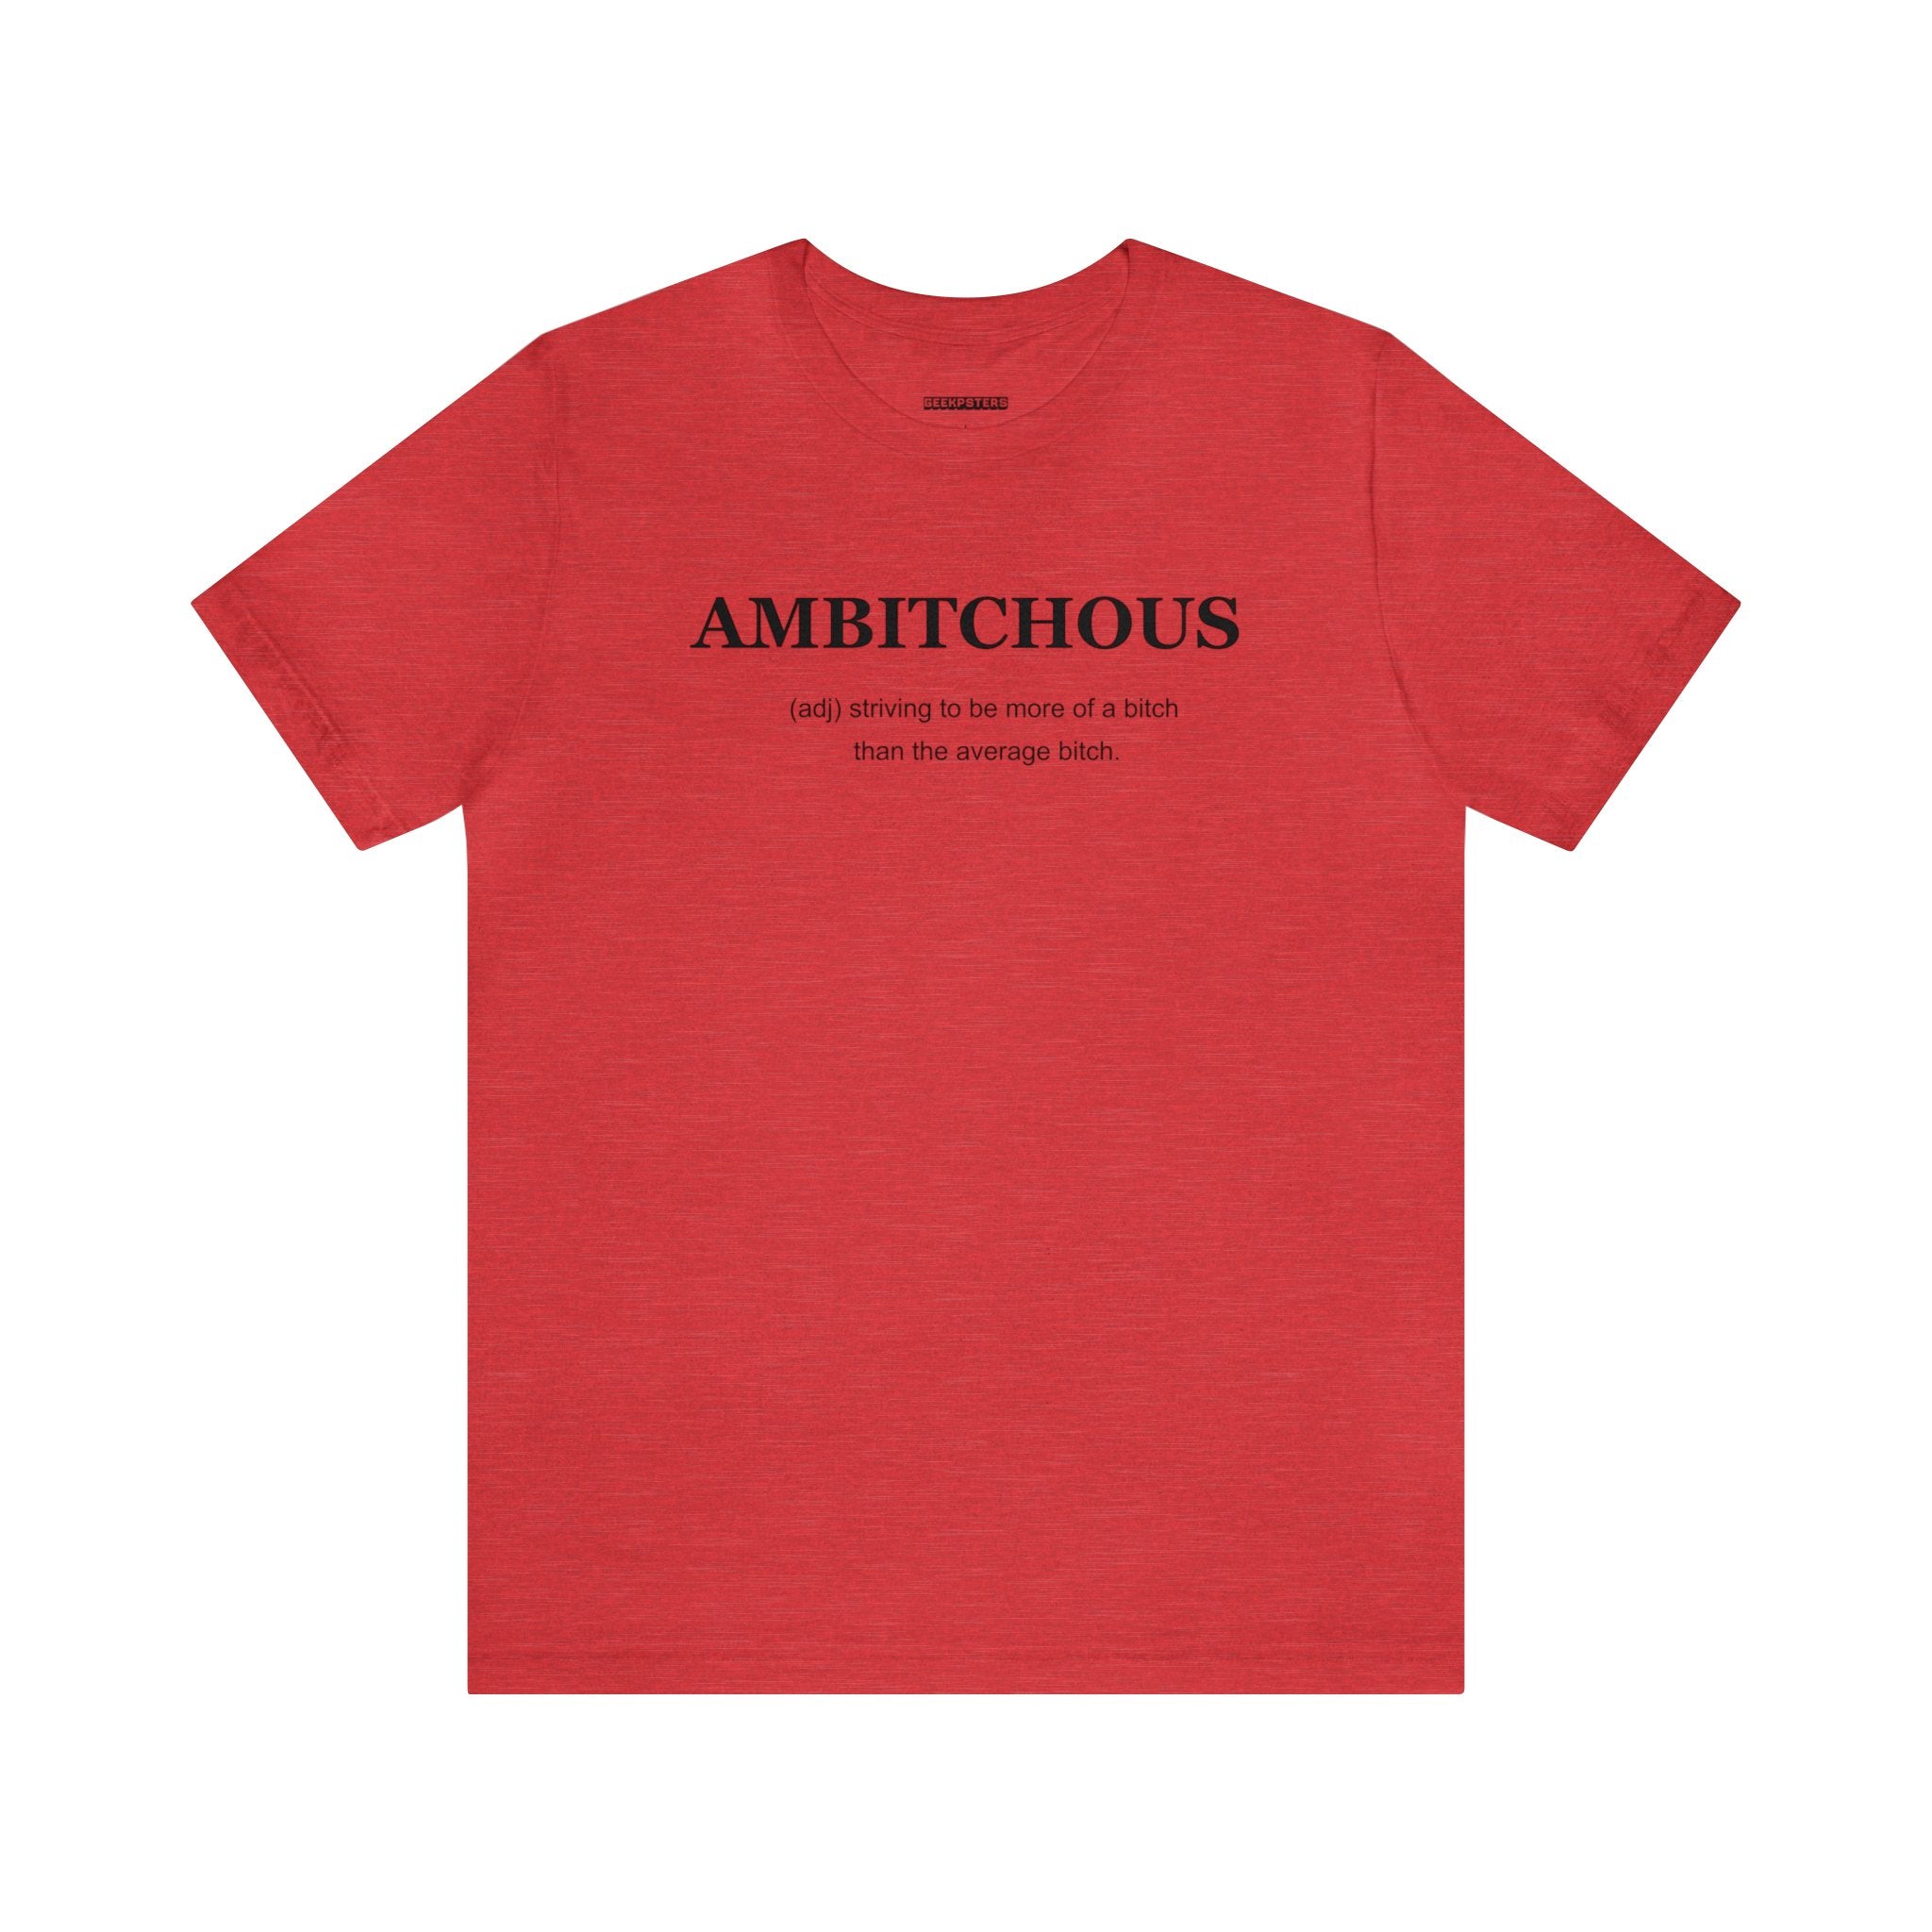 A red Ambitchious T Shirt with the word ambitious on it.